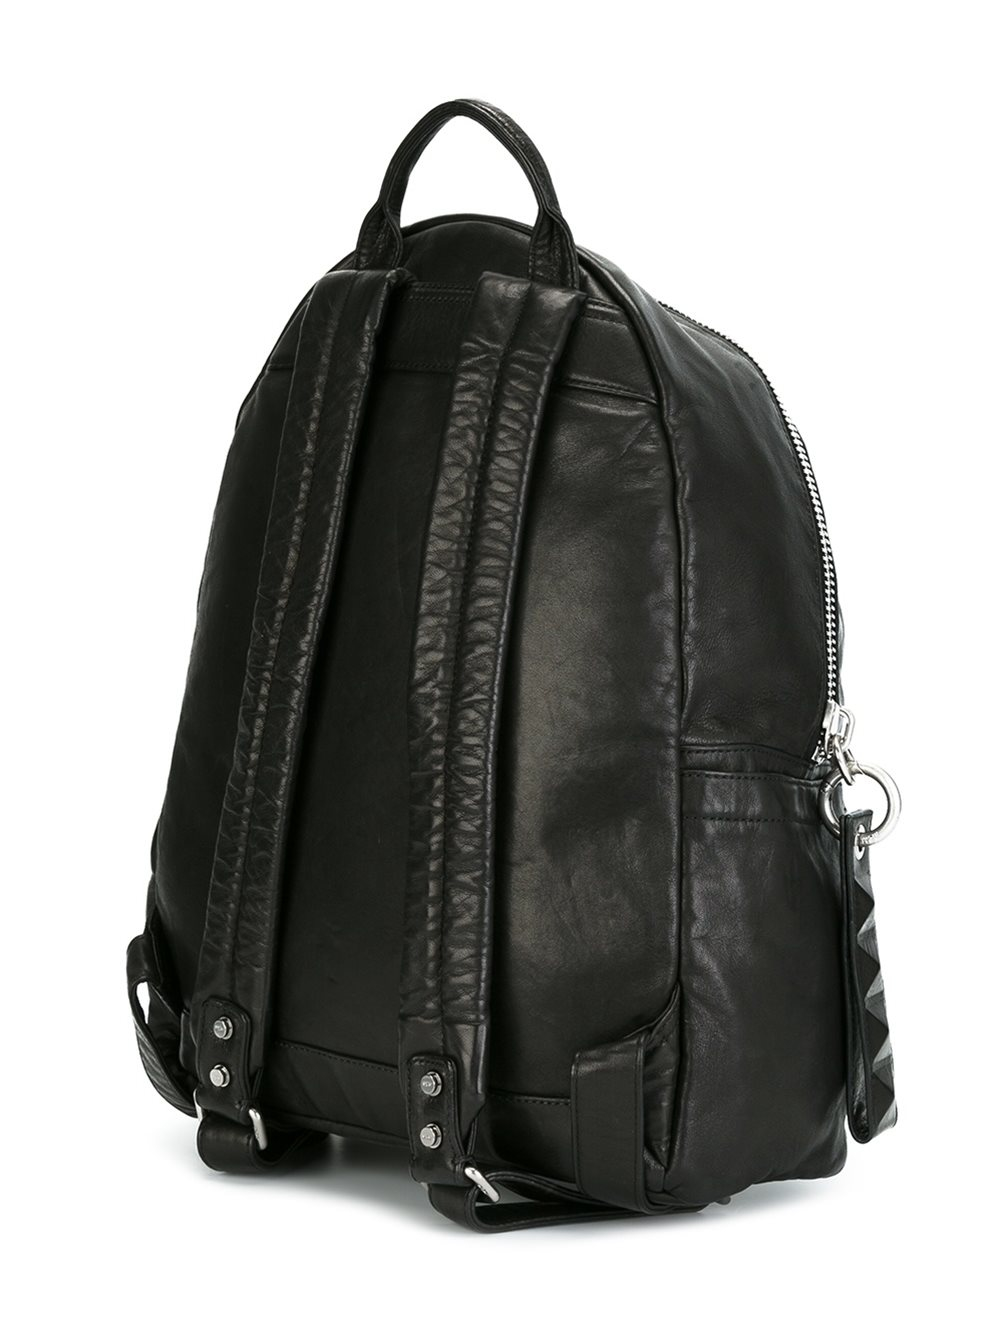 Lyst - Mcm Classic Backpack in Black for Men